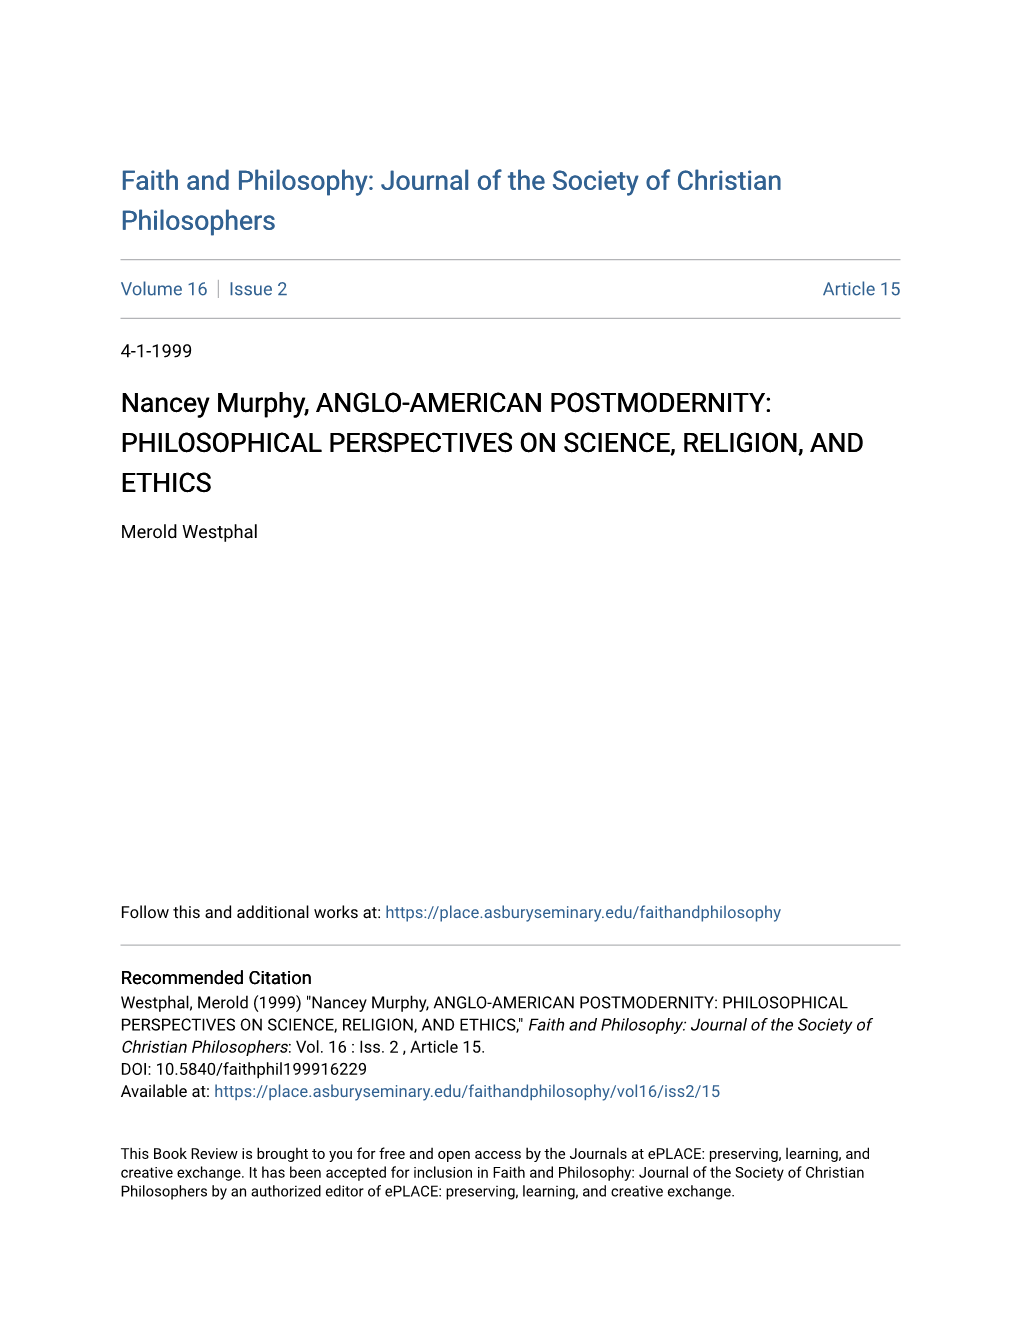 Philosophical Perspectives on Science, Religion, and Ethics